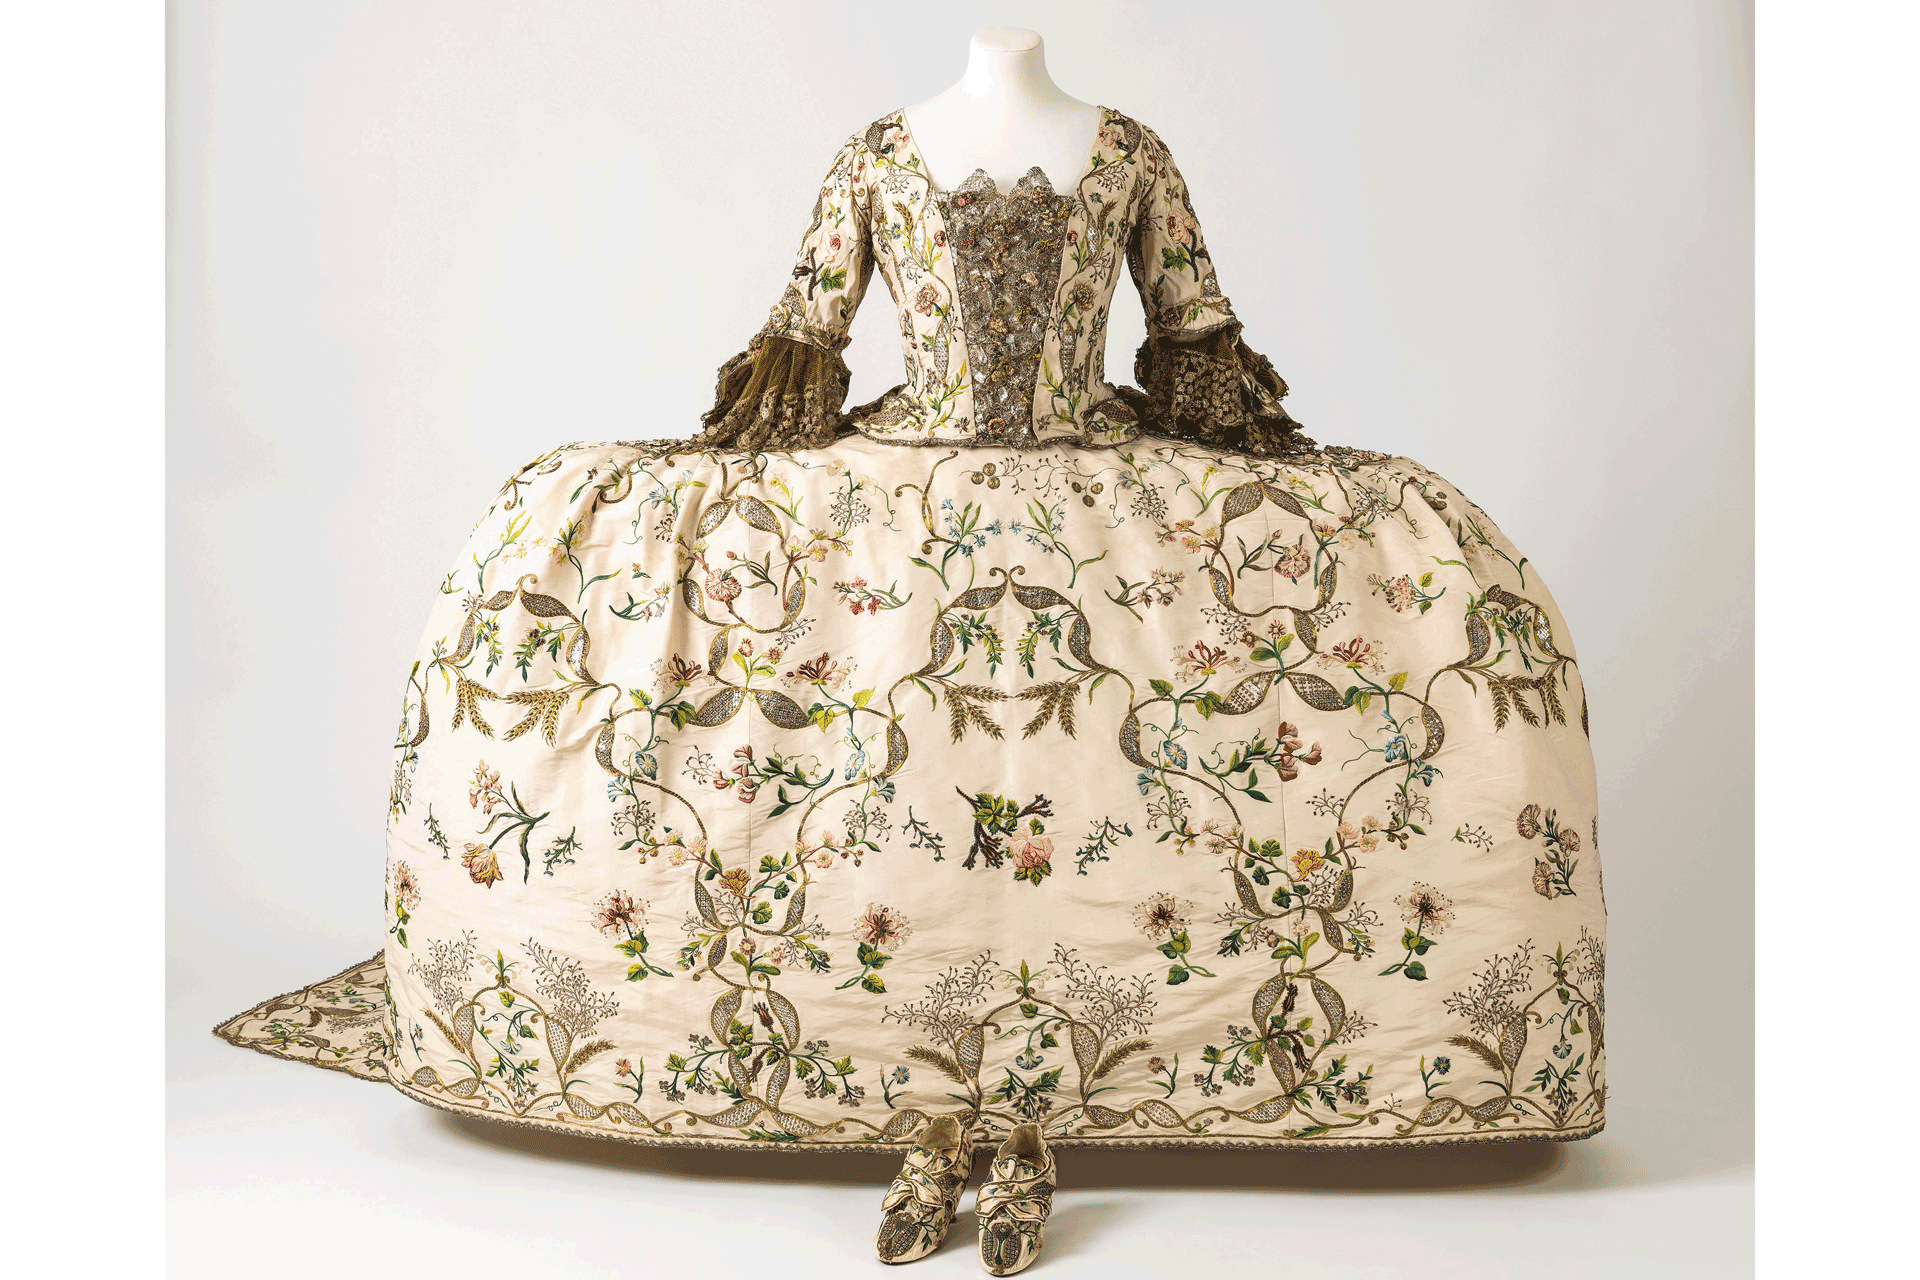 Court dress recorded as having been worn at court in the 1760s.